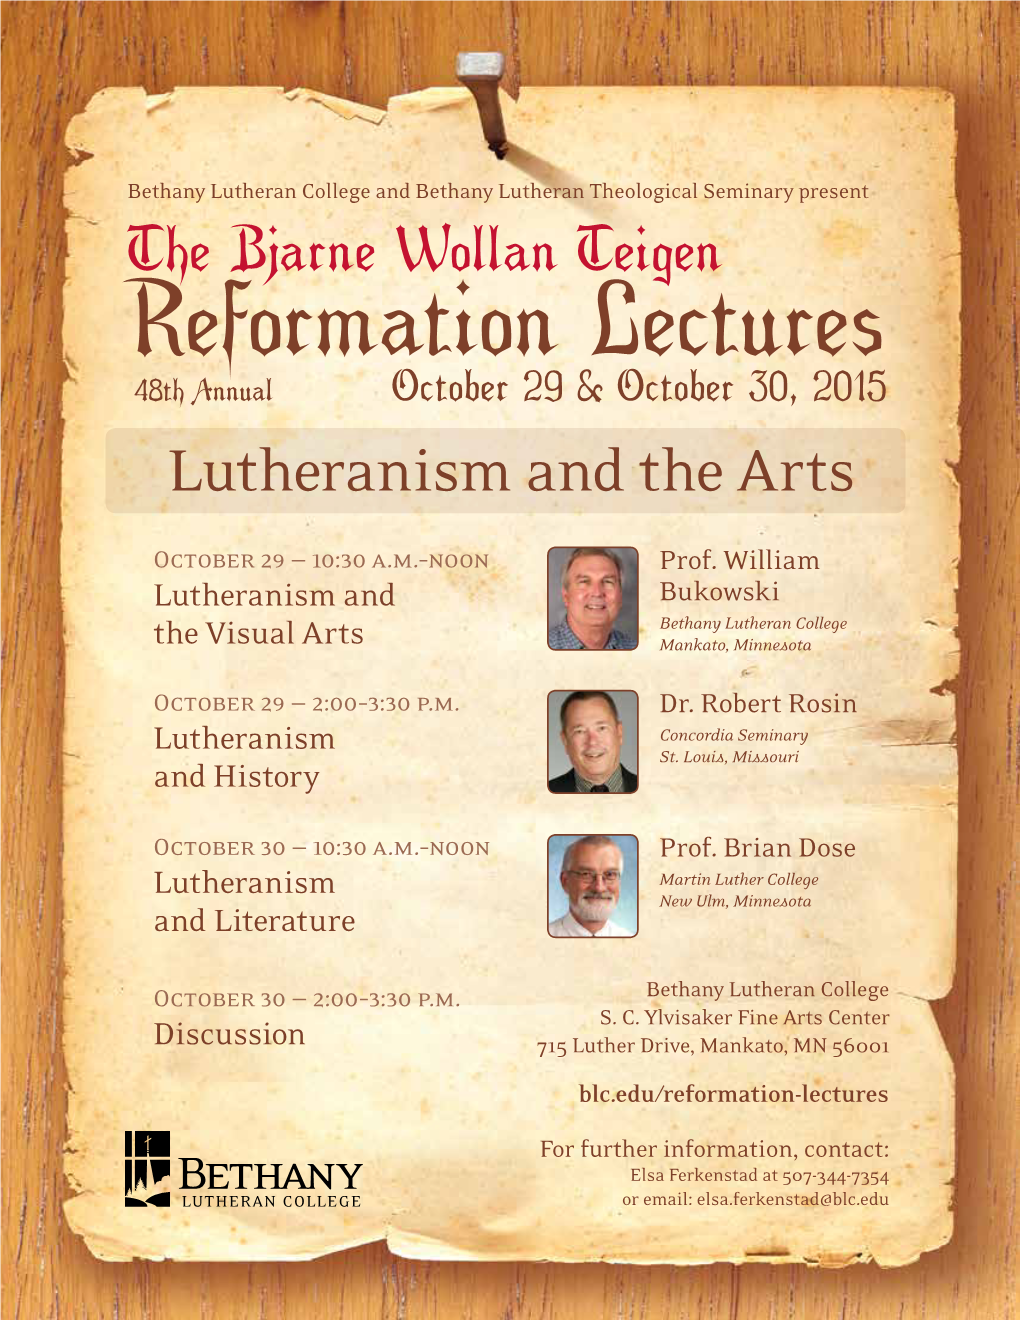 Reformation Lectures 48Th Annual October 29 & October 30, 2015 Lutheranism and the Arts